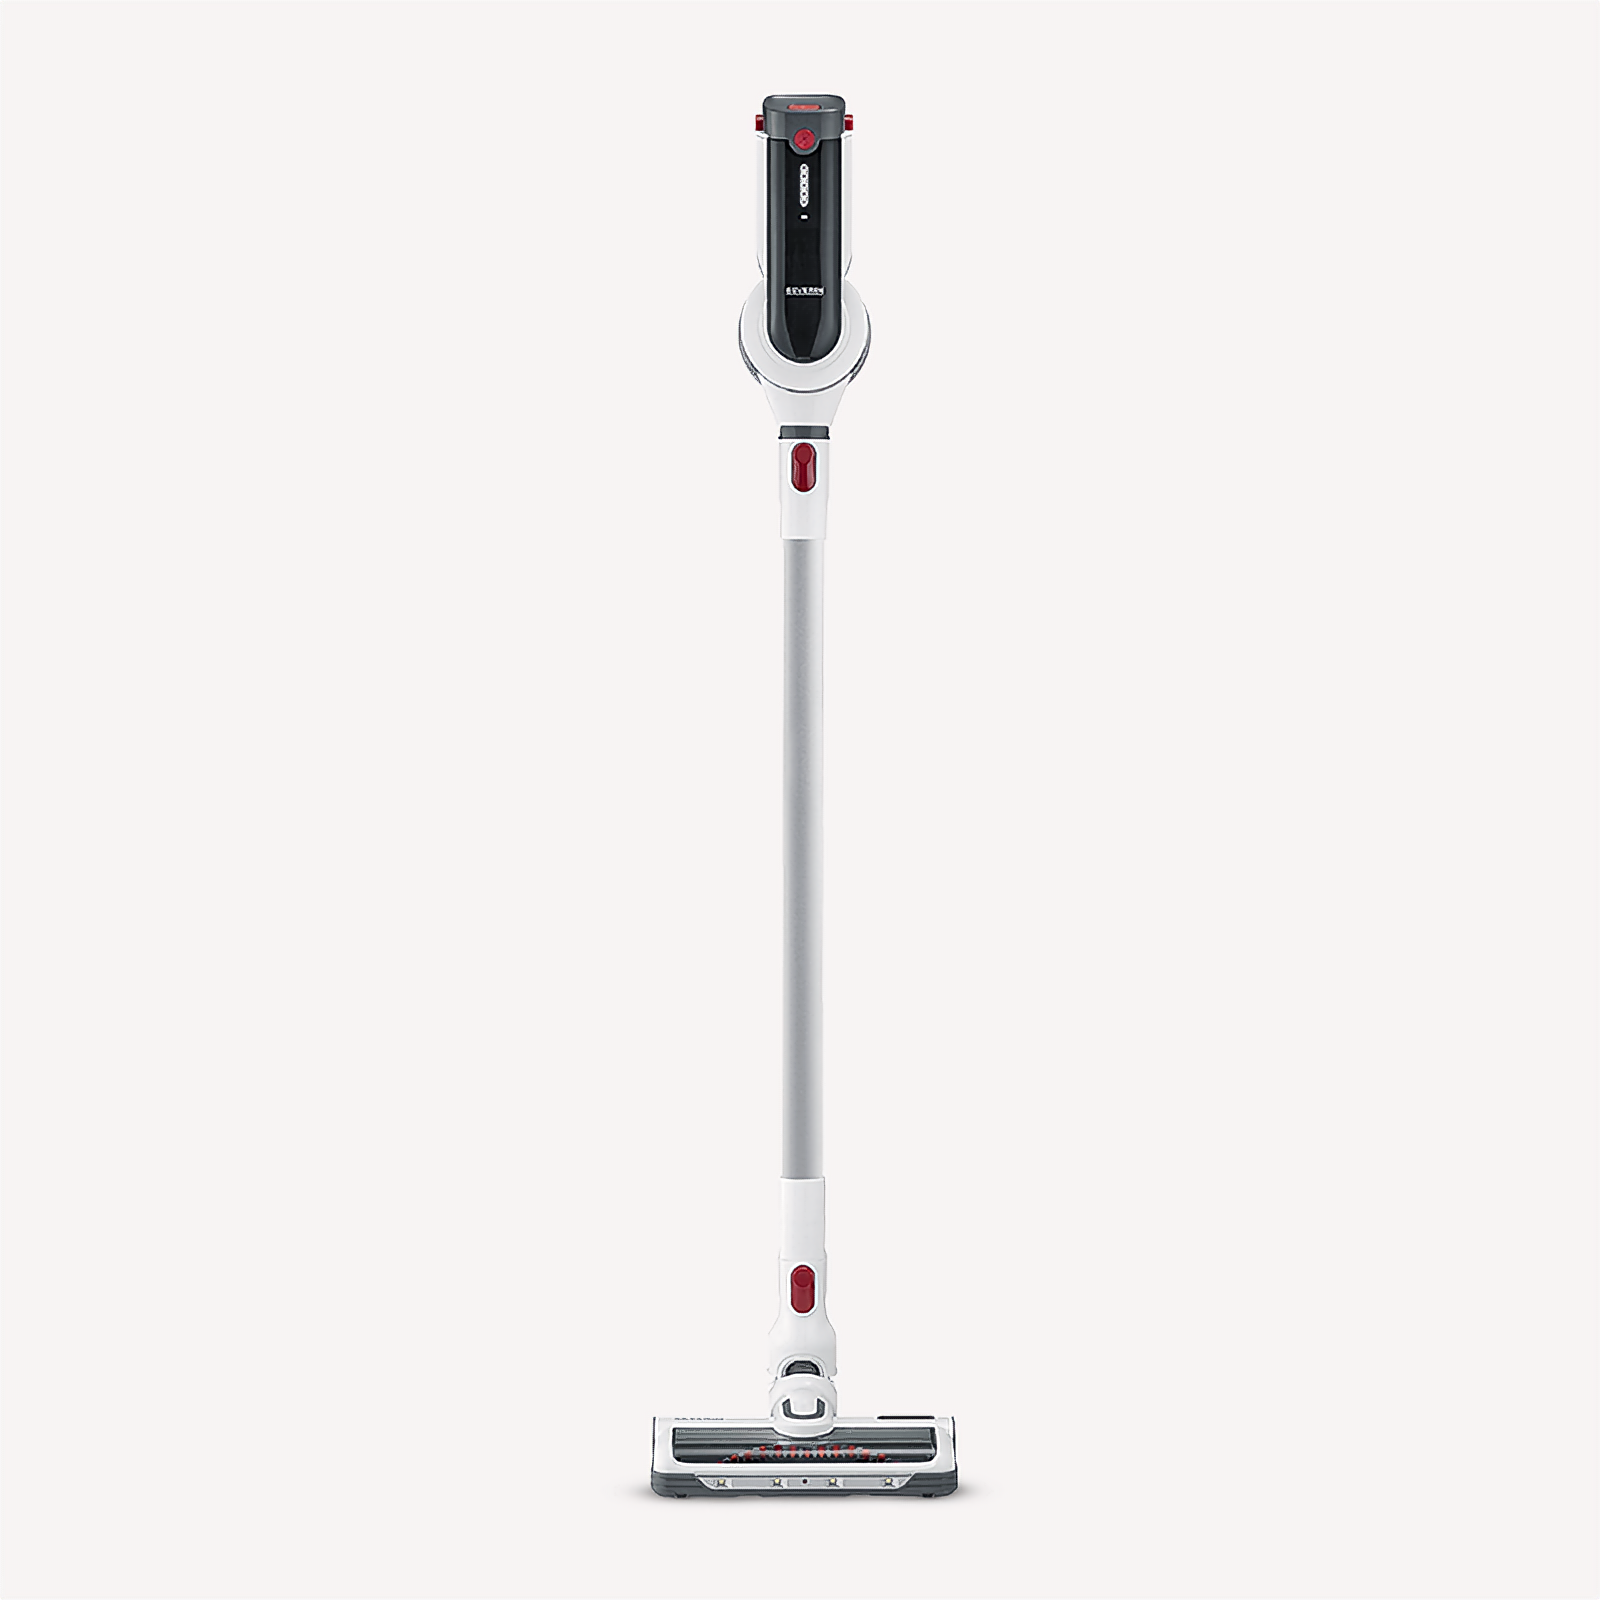 [Originalprodukt aus Übersee] Cordless 2-in-1 cleaner stick HV 7166 vacuum and SEVERIN - (Official) hand